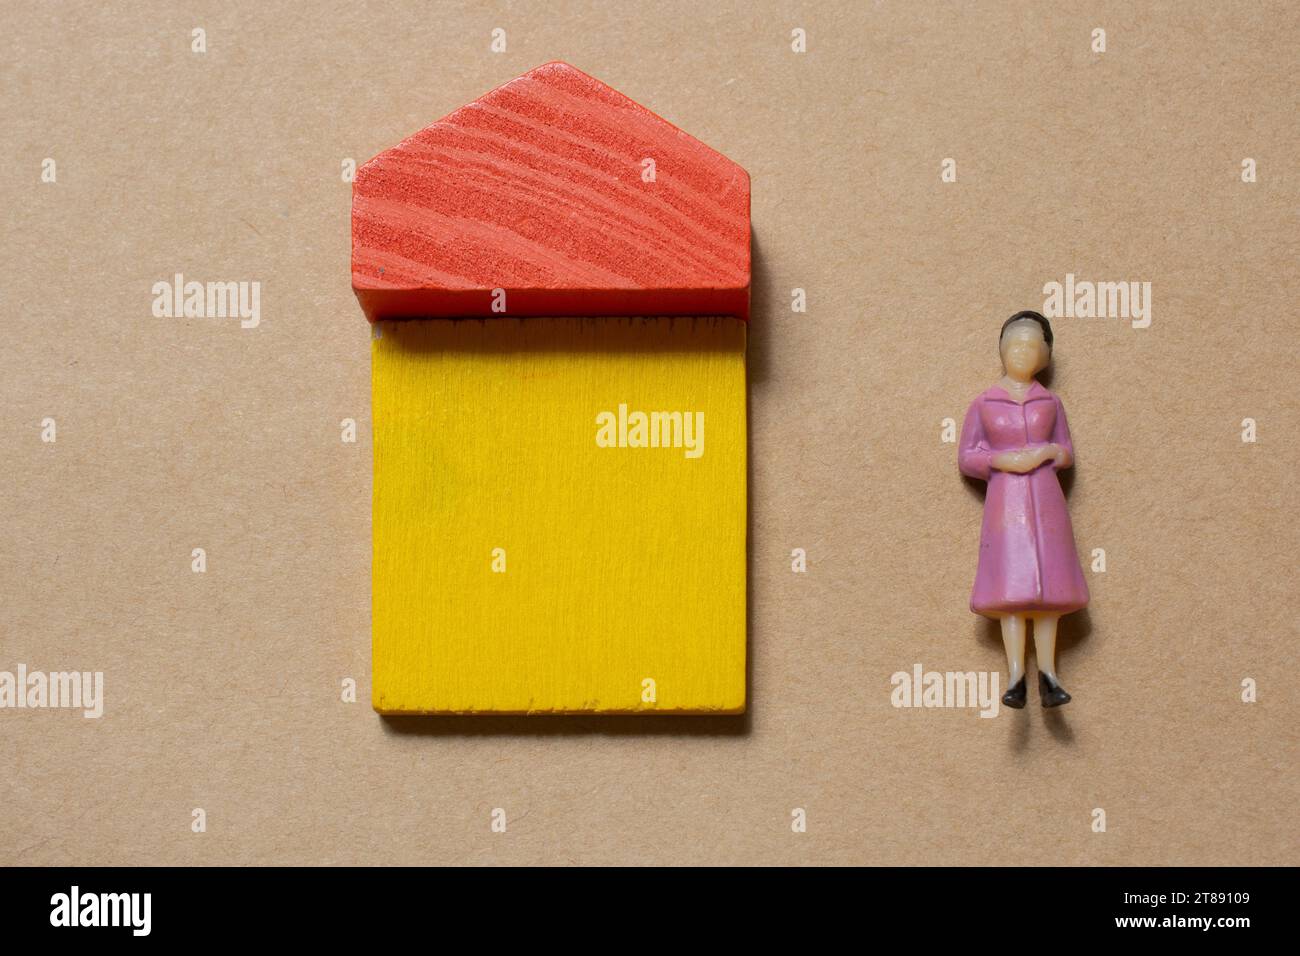 Woman figurine by House from wooden blocks as concept of buying, selling, renting real estate, building and eco style Stock Photo